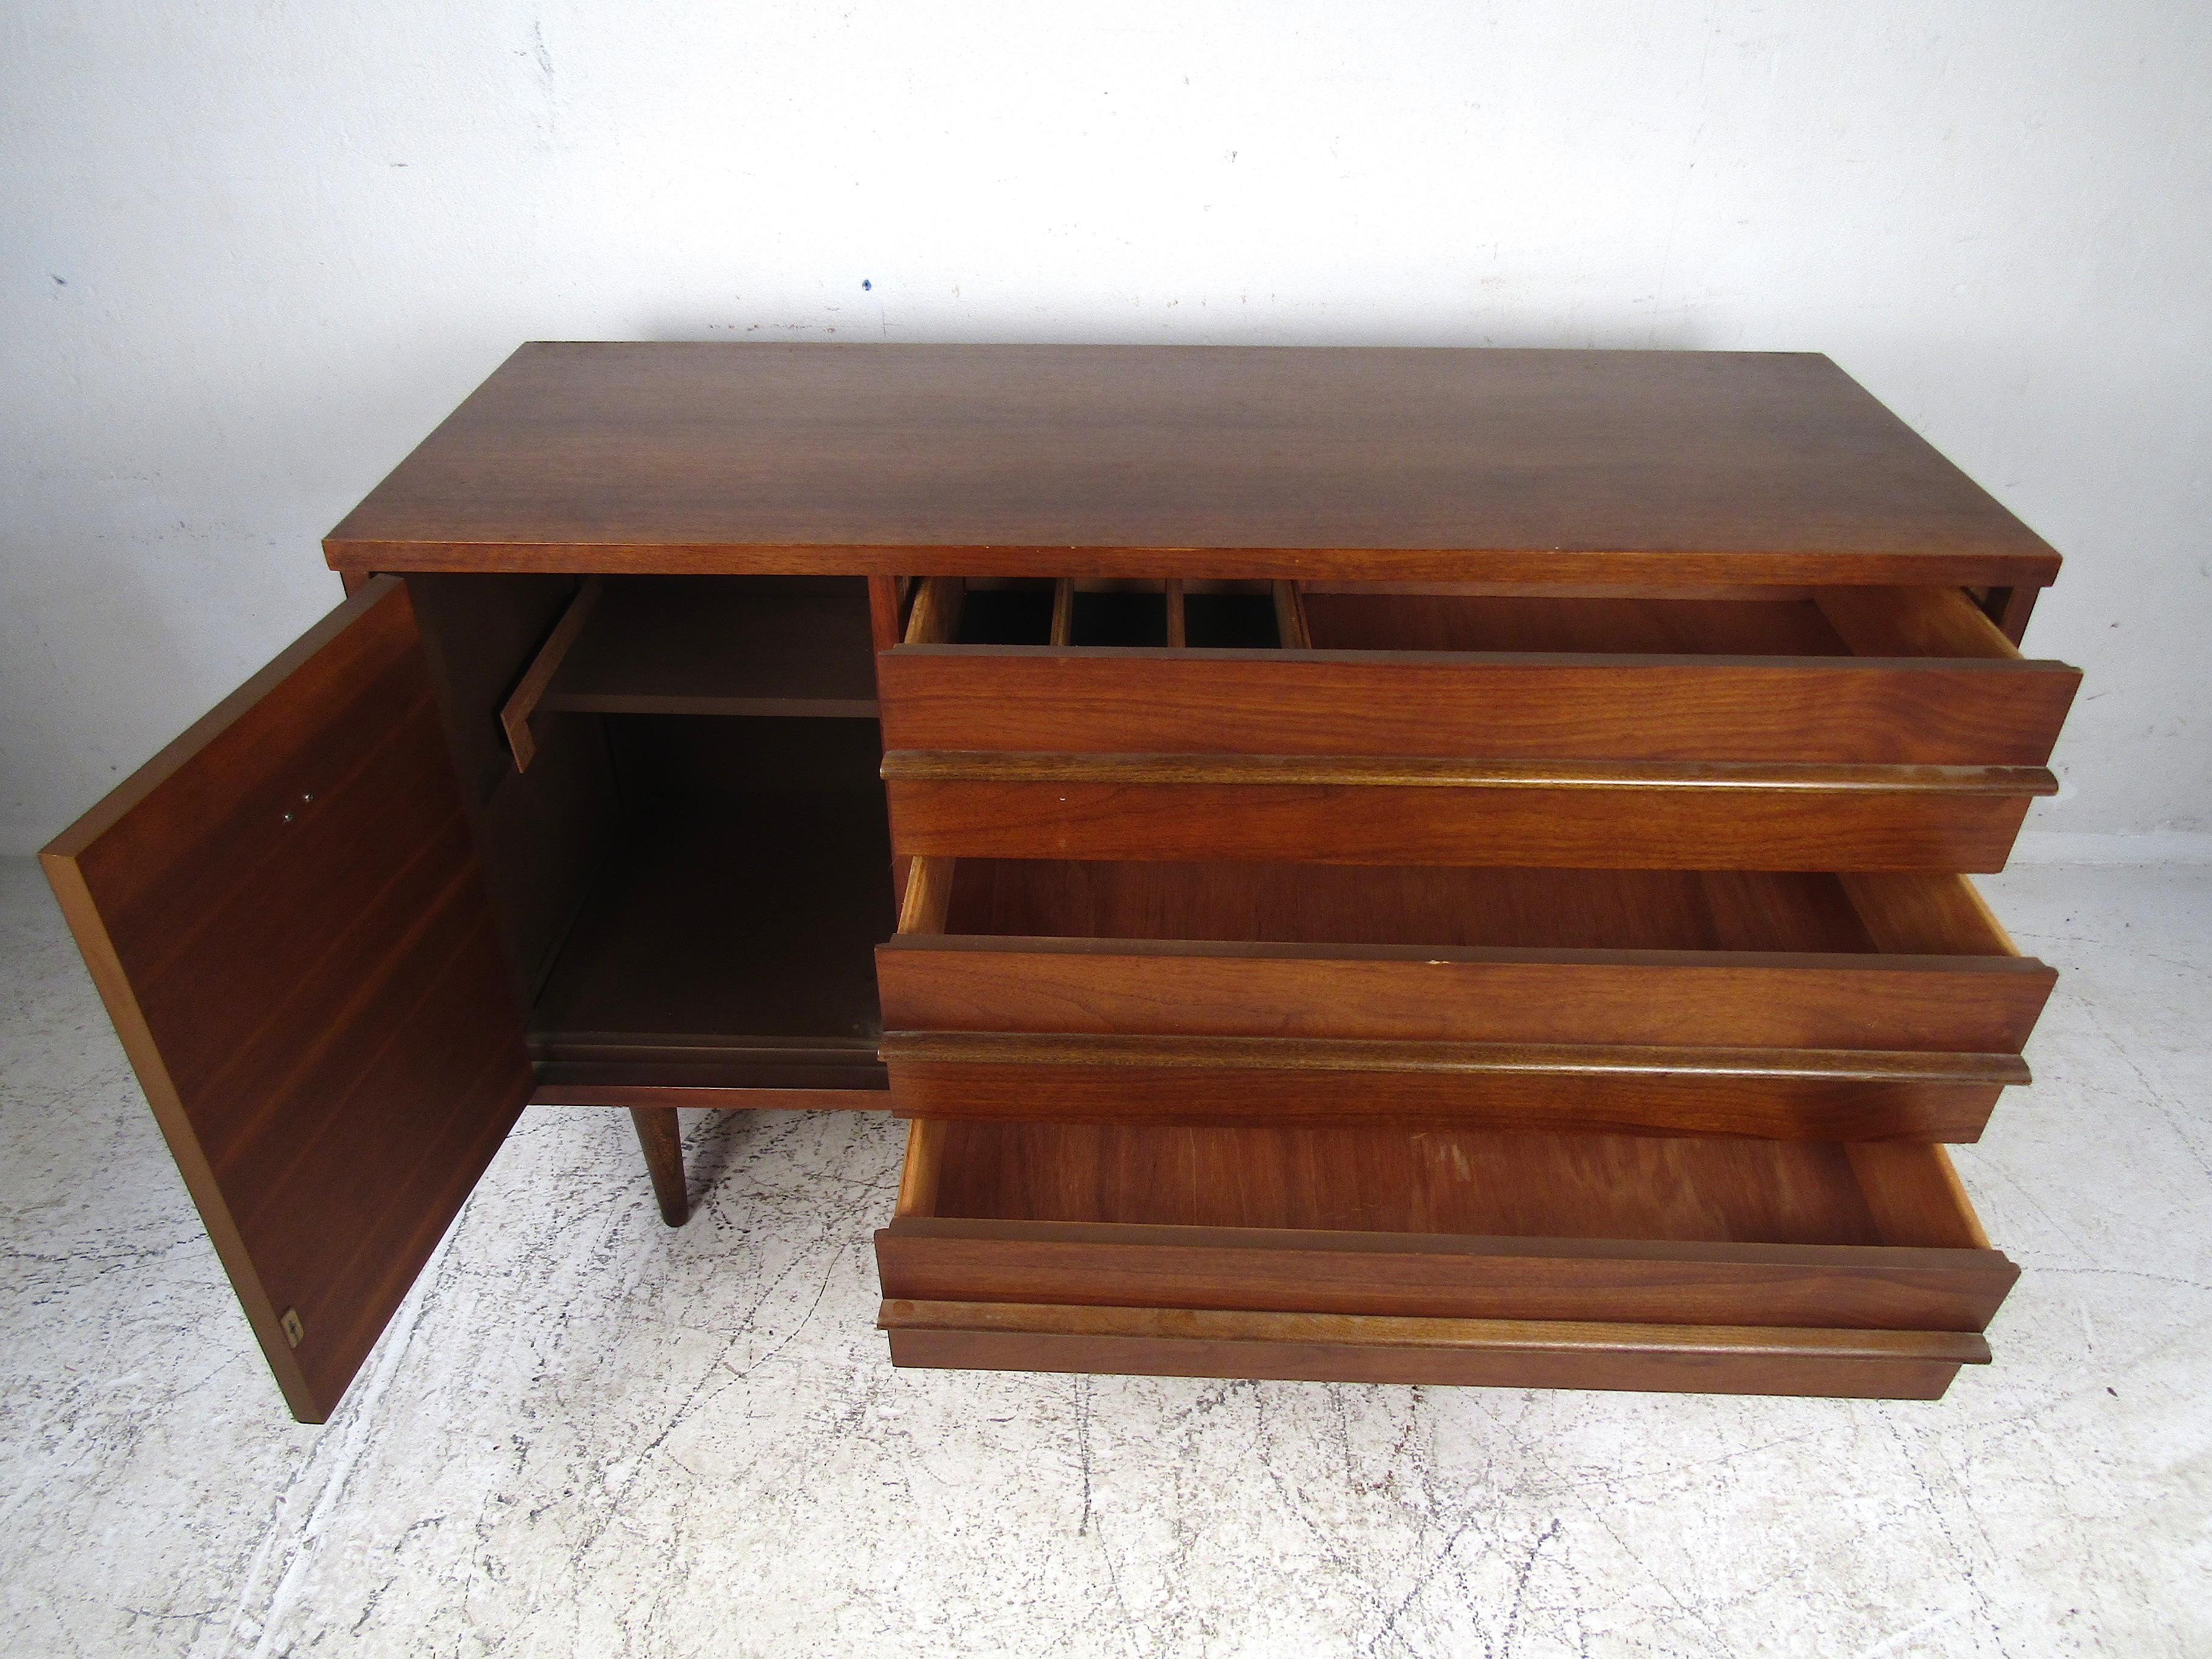 American Compact Midcentury Credenza in Gunstock Walnut by Basset Furniture Inc.